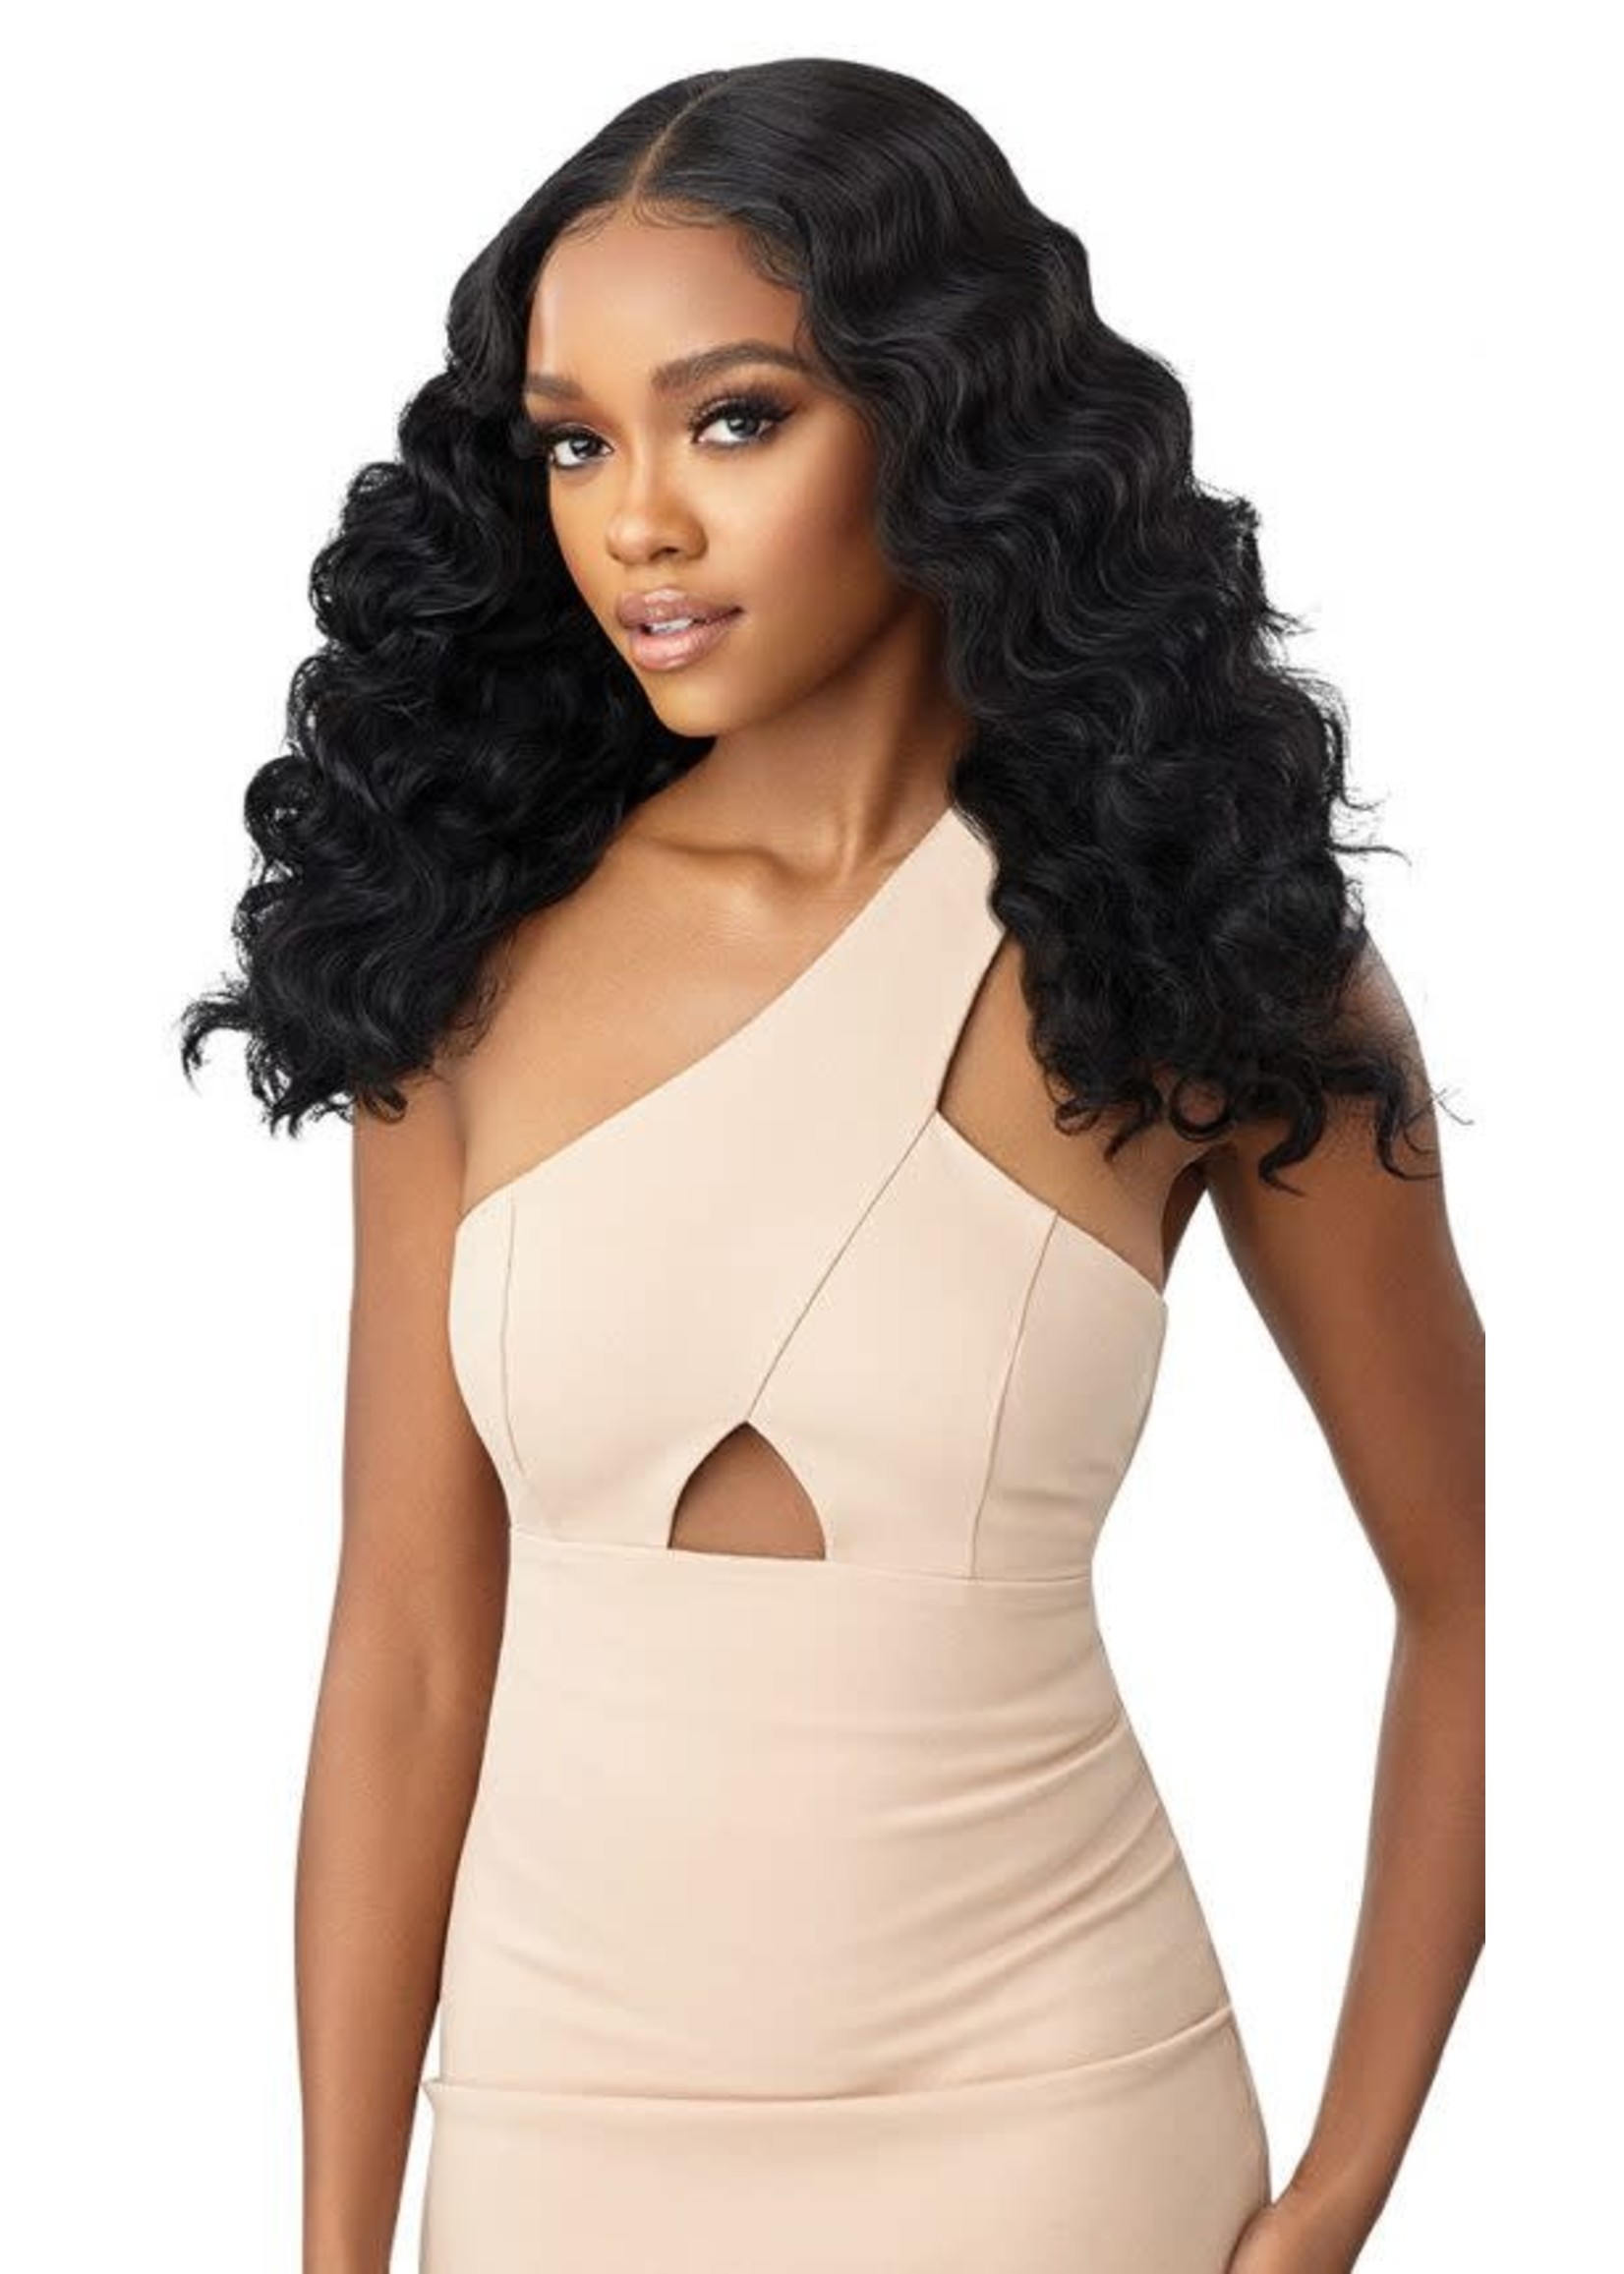 Outre melted Hairline lace Front Wig Fabiola DR Creamy Truffle